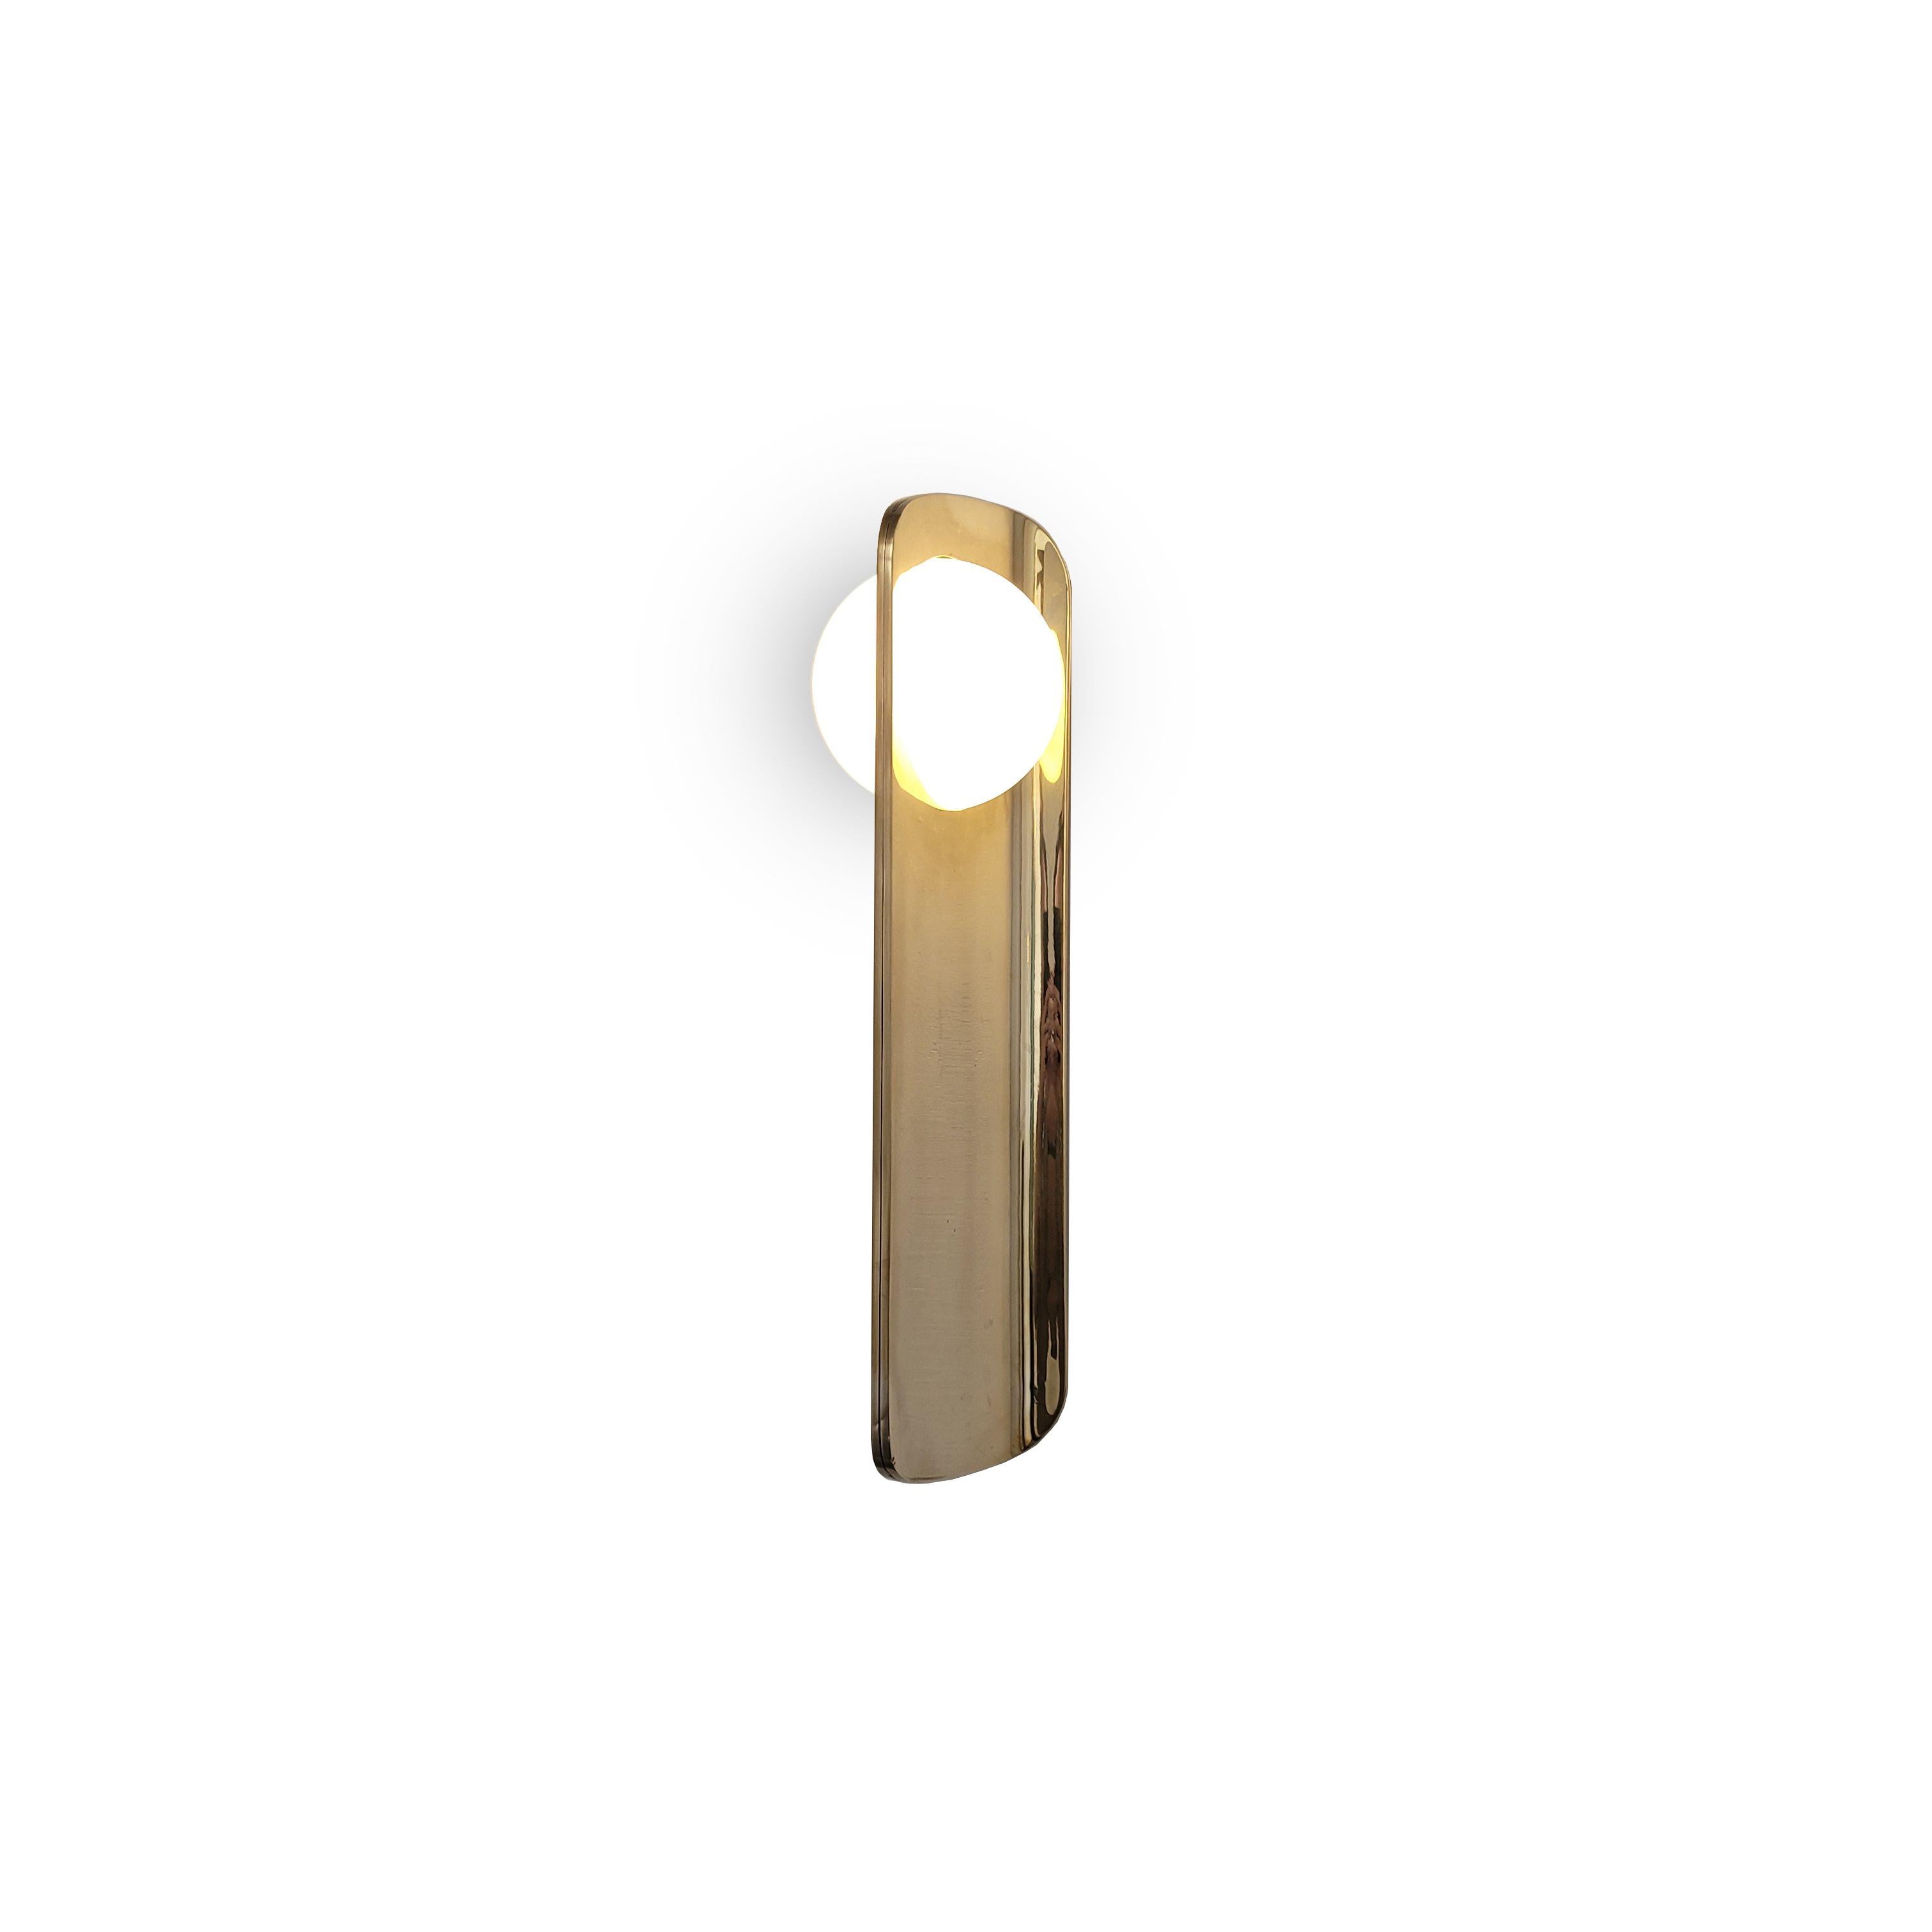 Libellula sconce by Jan Garncarek
Dimensions: D 14 x W 12 x H 50 cm
Material: Brass, glass.

Information:
weight: 7 kg / 33 lb
voltage: 120V, 240V
lamping: 1 X 12 W dimmable LED module
lumens:1000 Im
kcolortemperature:2700 K
led driver: